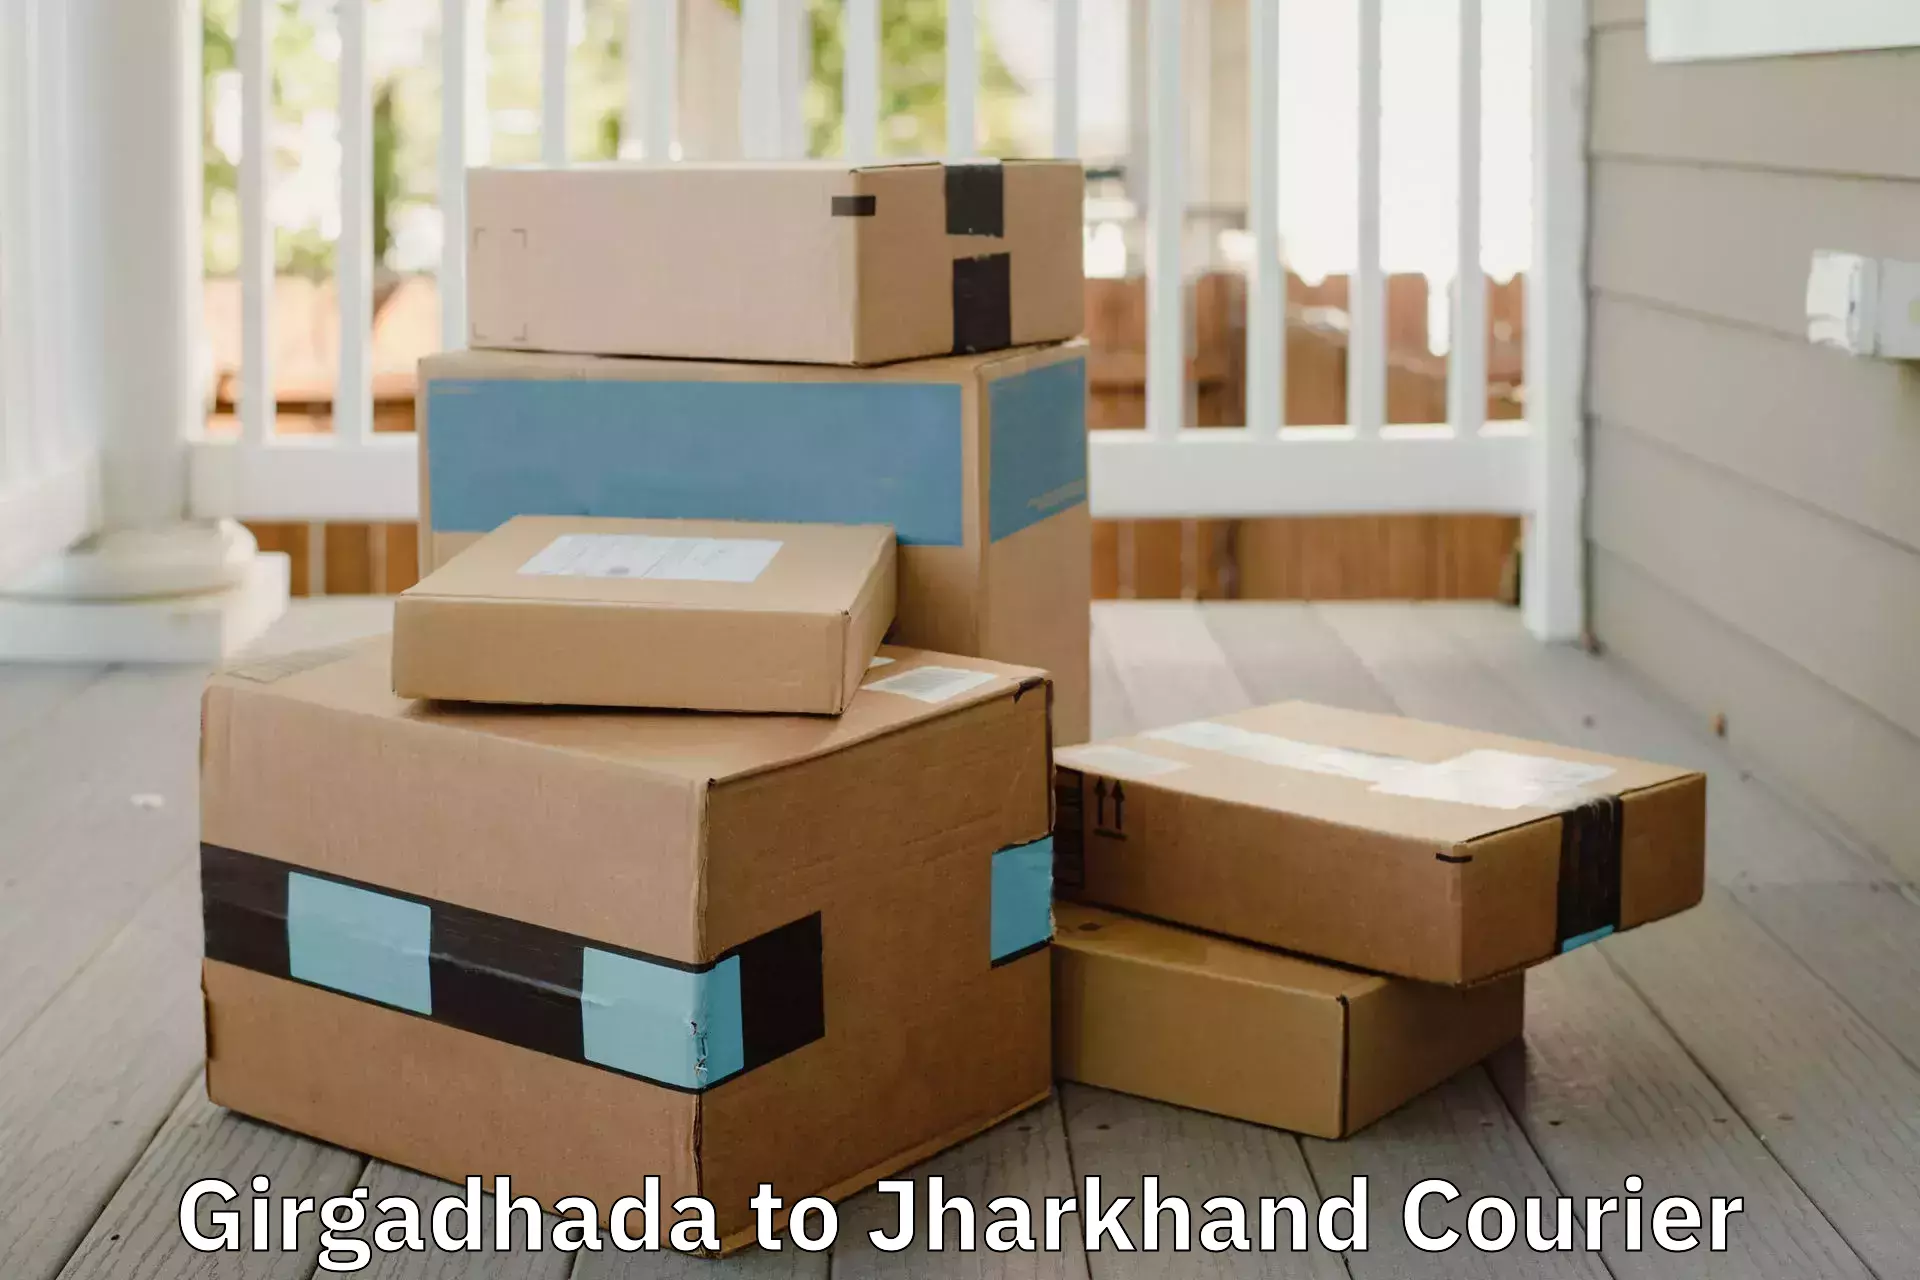 Packing and moving services Girgadhada to Jharkhand